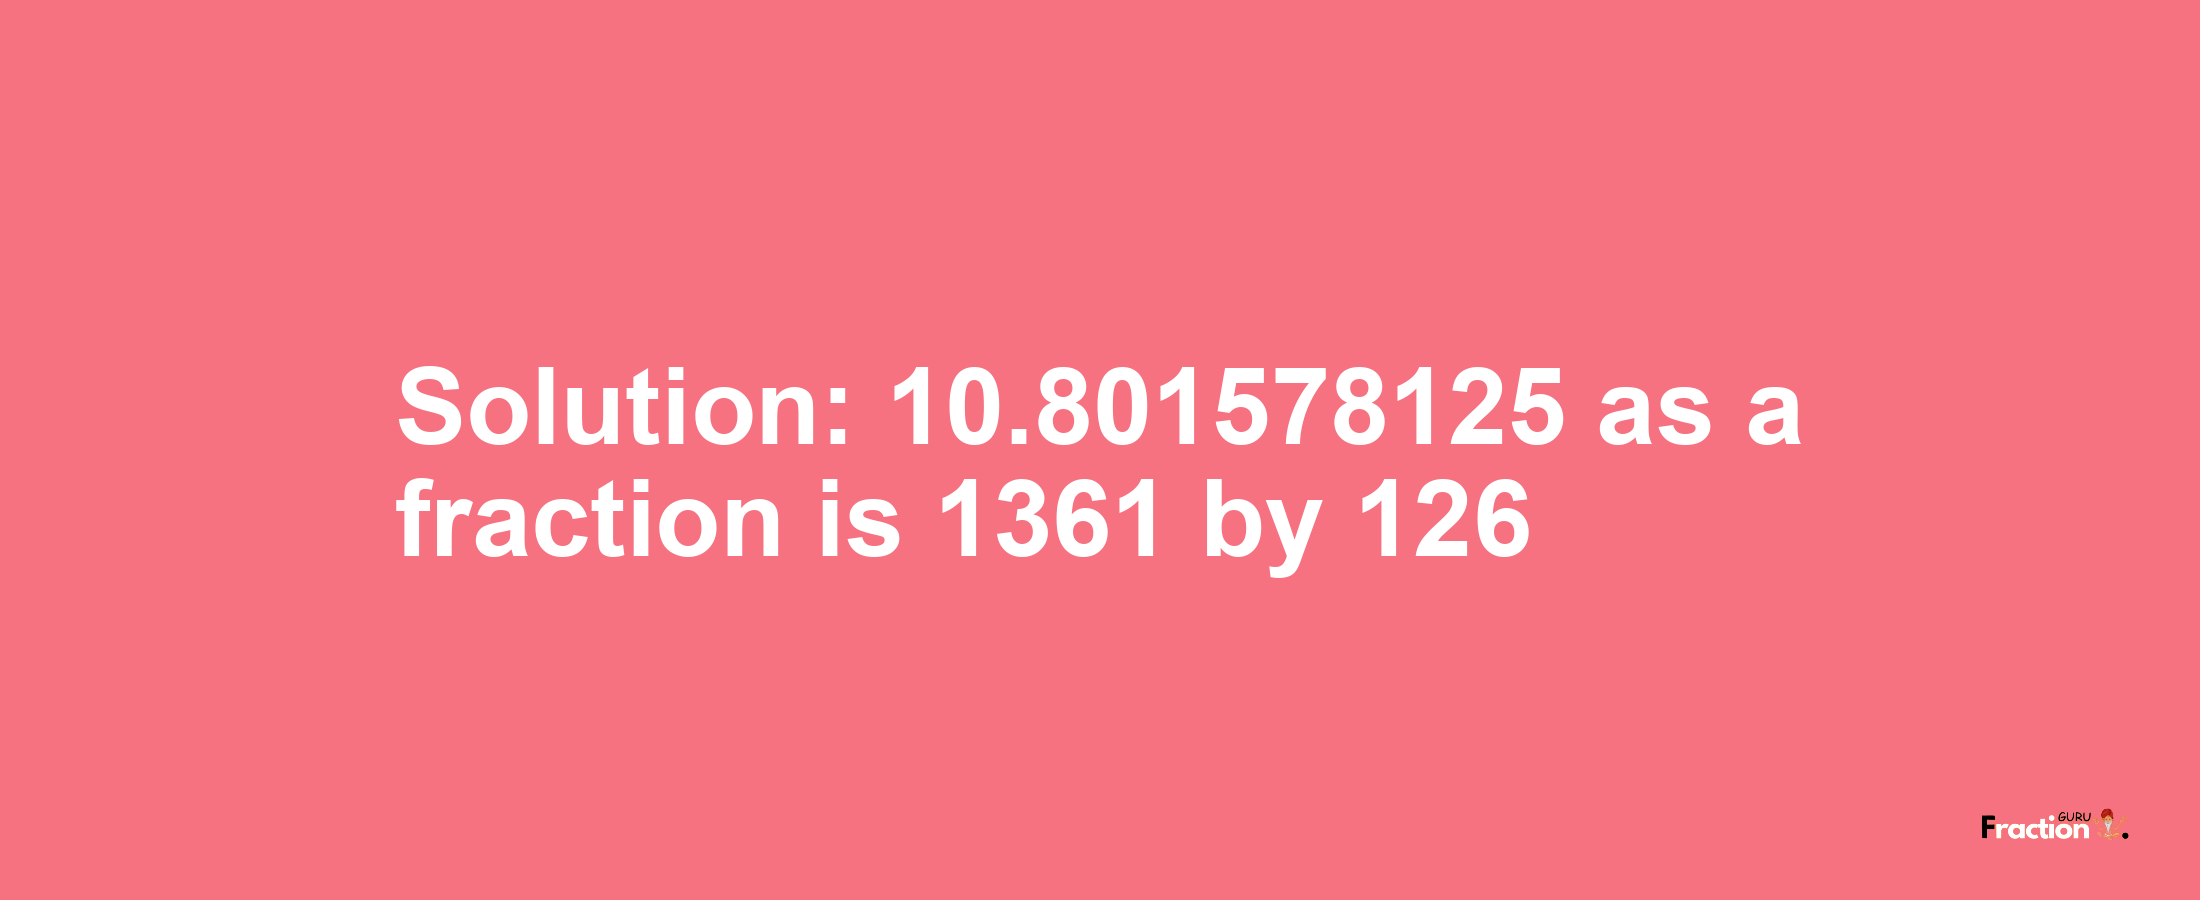 Solution:10.801578125 as a fraction is 1361/126